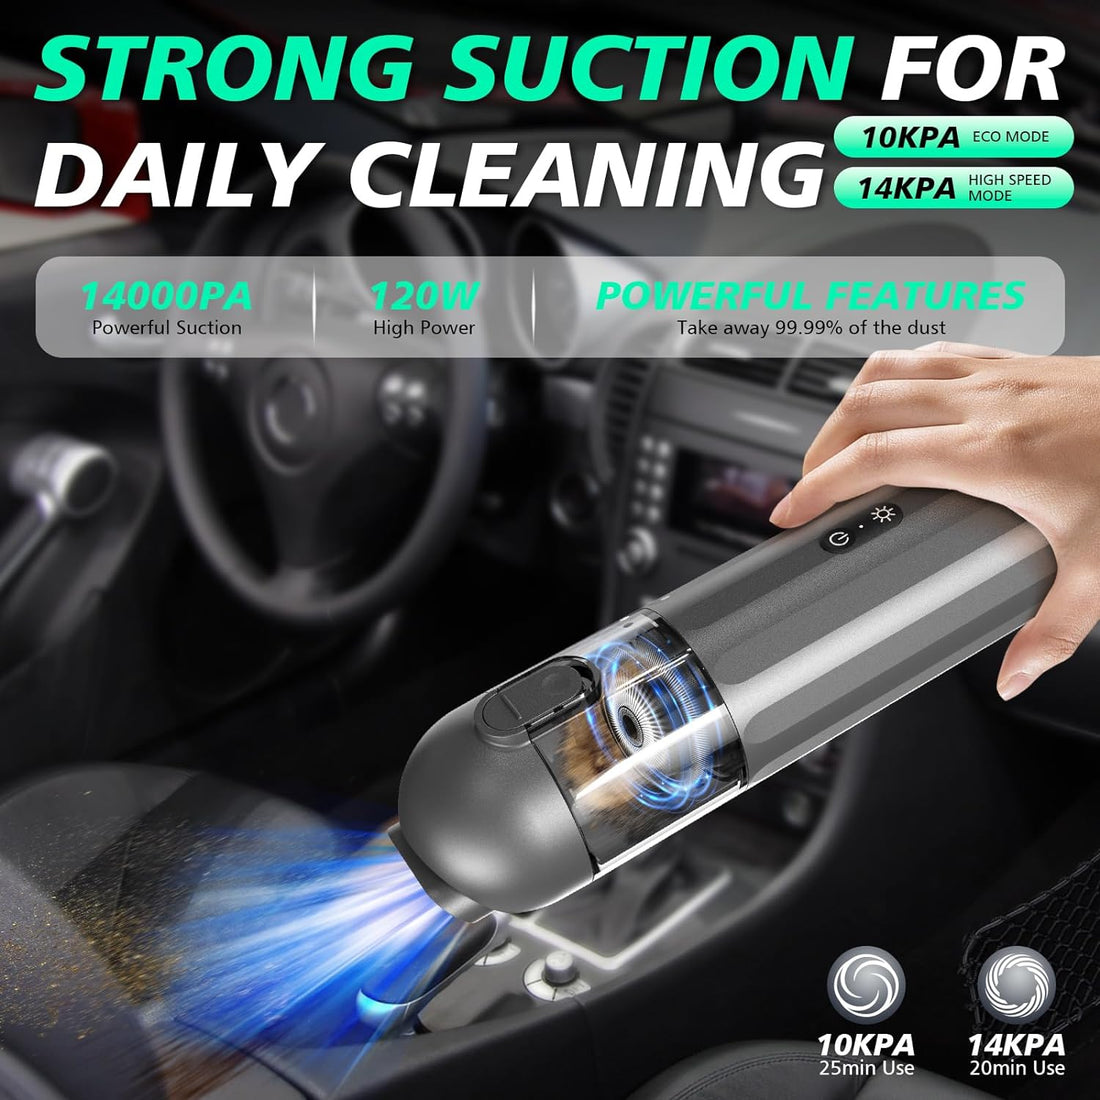 Homtronics Portable Car Vacuum, 14000PA/110W High Power Rechargeable Cordless Car Vacuum Cleaner with 3-Layer Filters, 2-Speeds, Emergency Lights, 4 in 1 Air Blower, Hand Held Vacuum Cleaner for Car